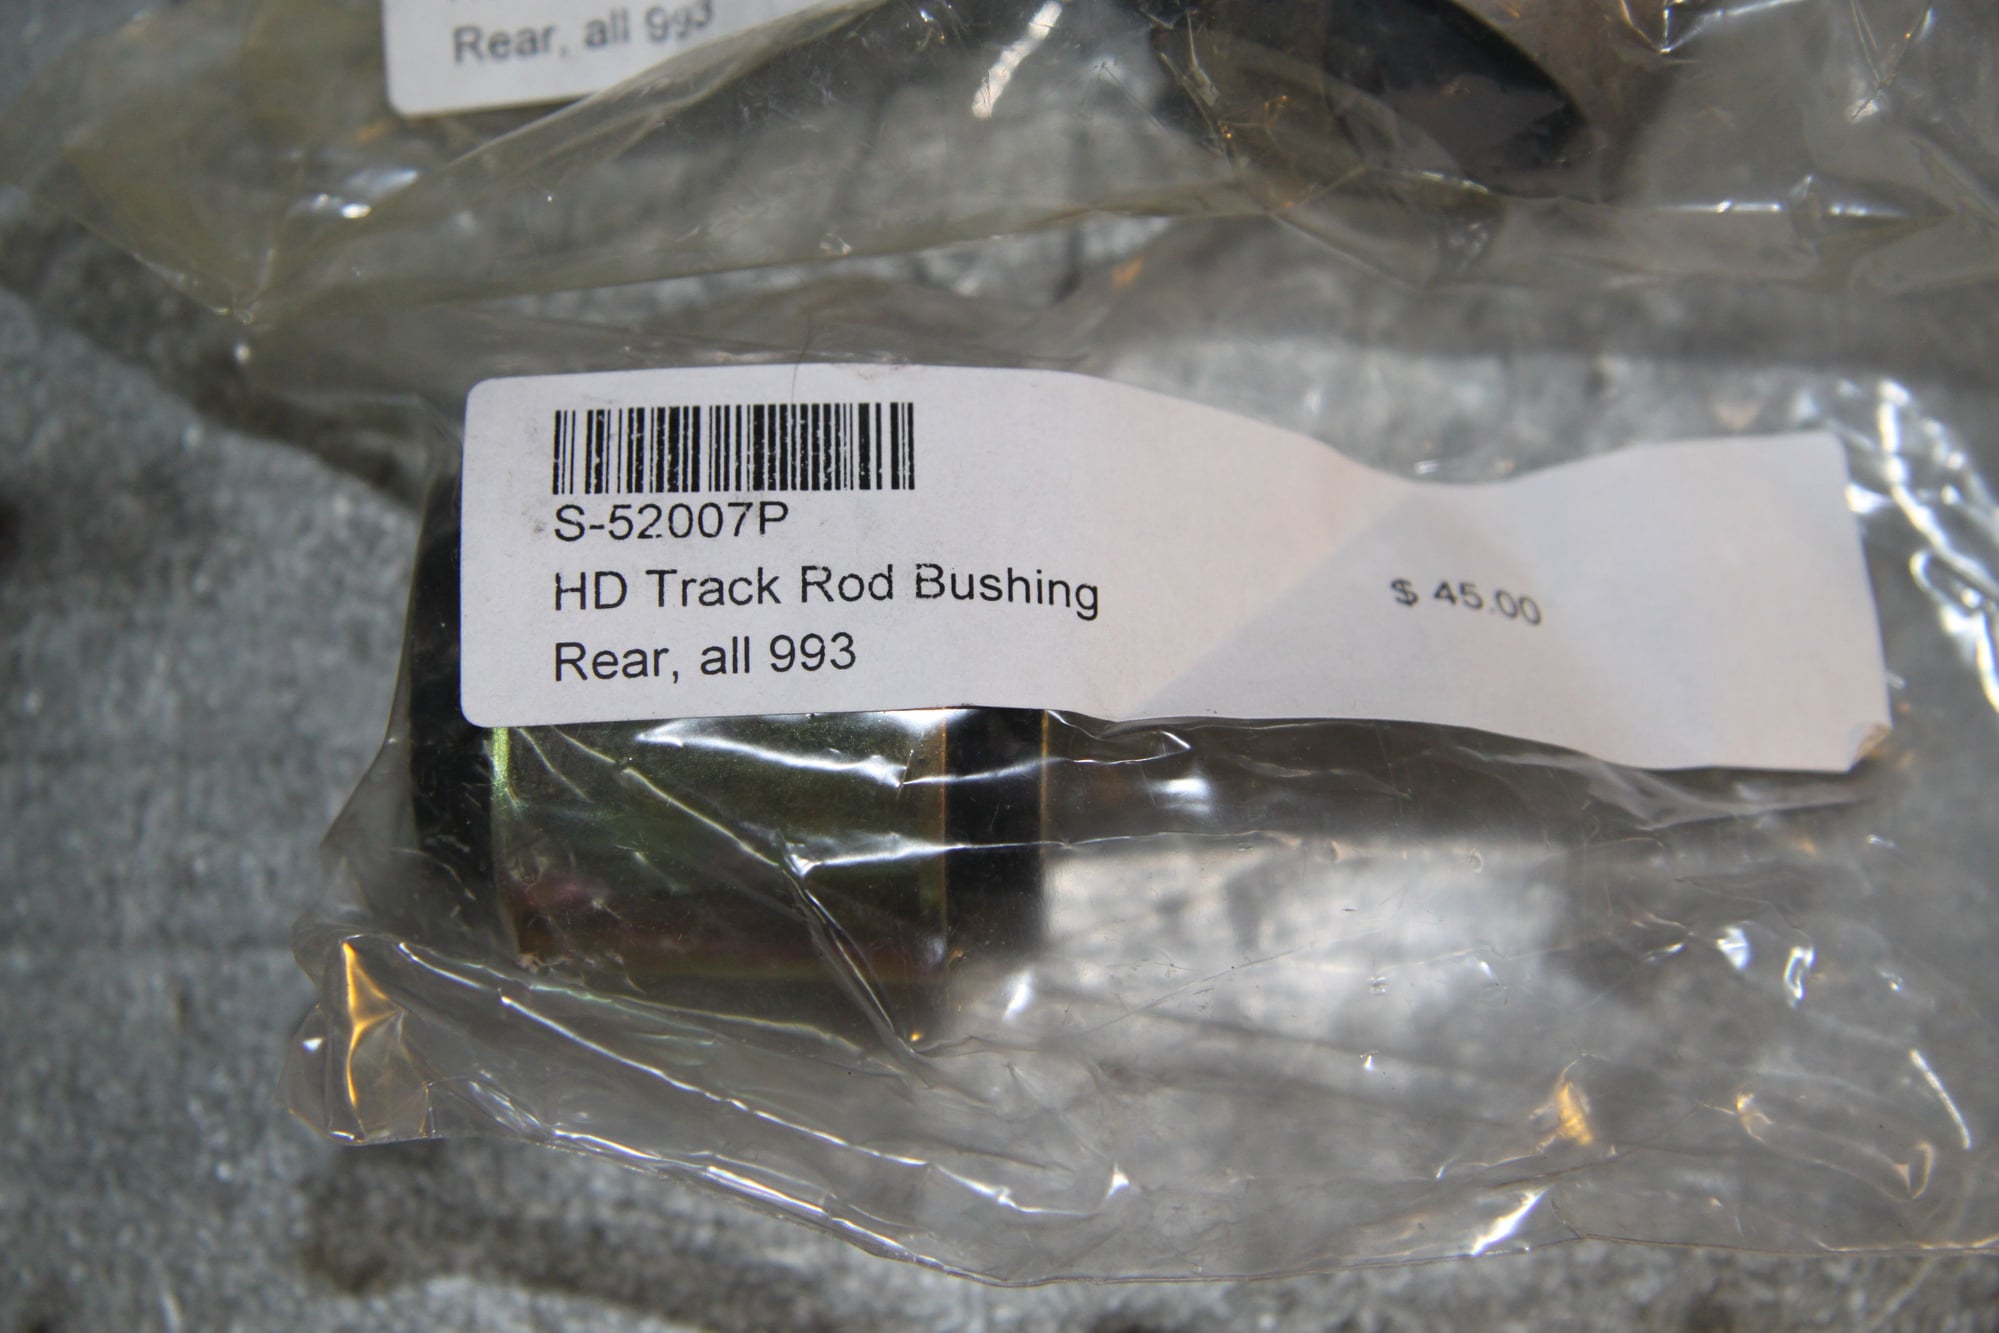 Steering/Suspension - 993 parts for sale - Total of 8 new in box HD Track Rod Bushings - New - 1995 to 1998 Porsche 911 - Danbury, CT 06810, United States